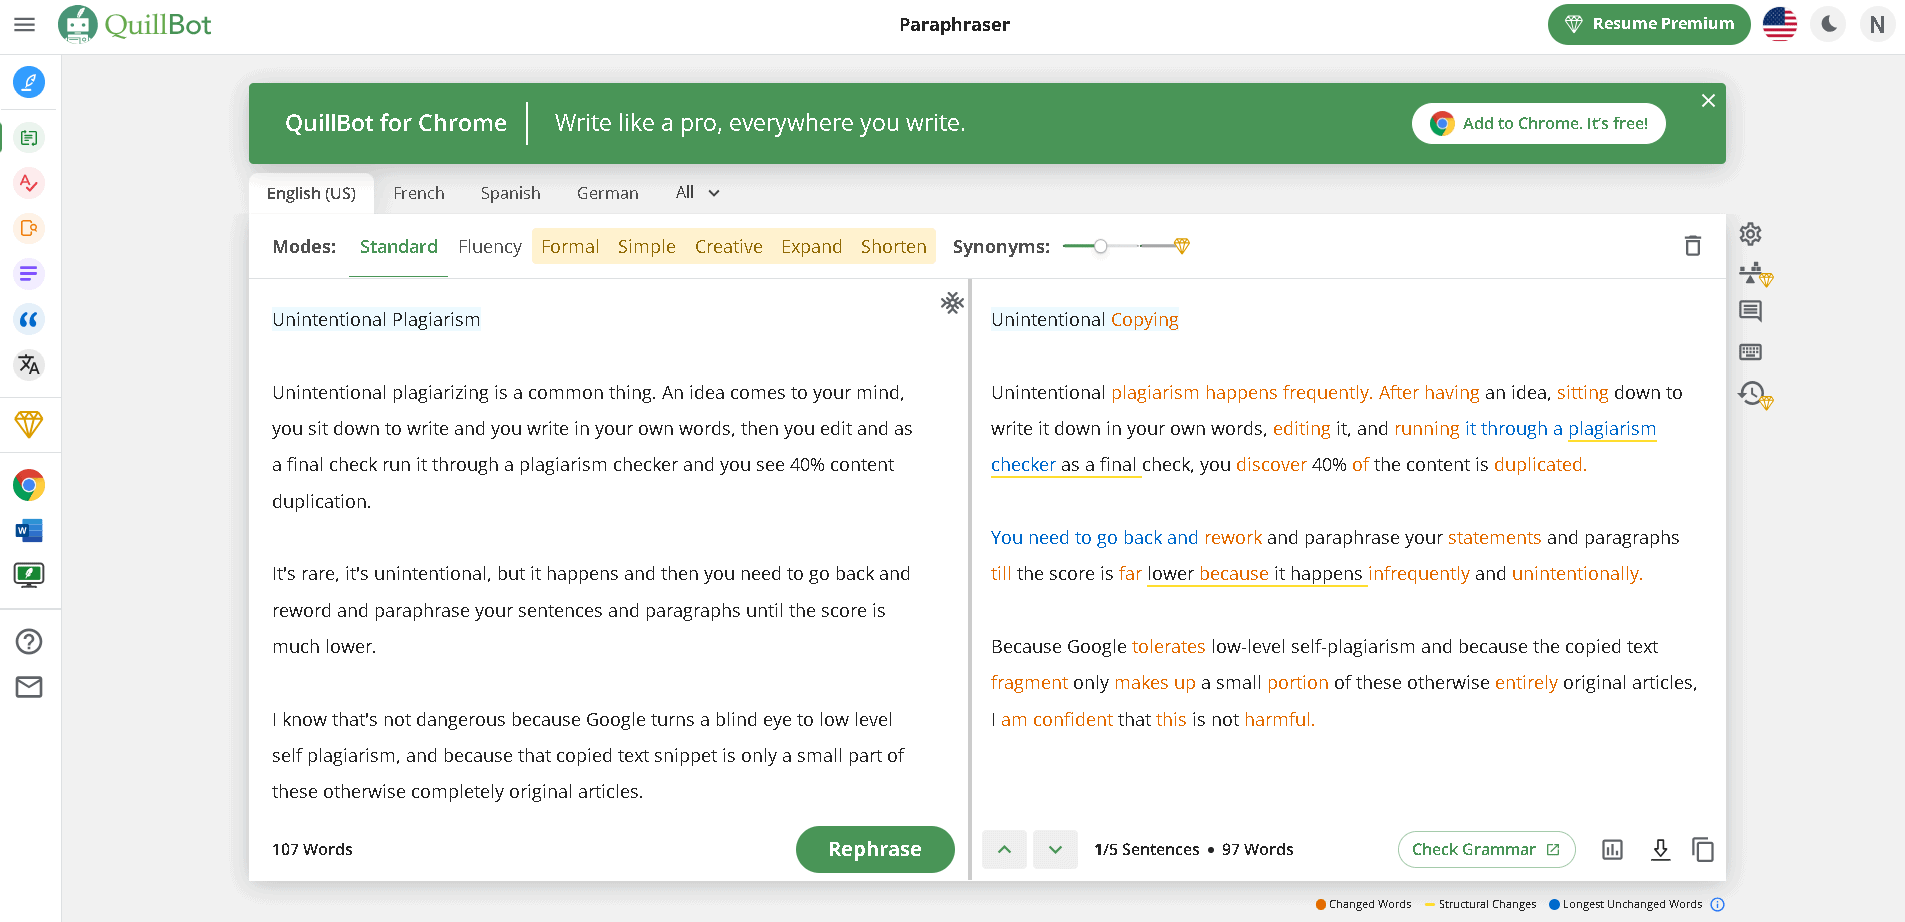 Quillbot can paraphrase content at the same level as Jasper AI